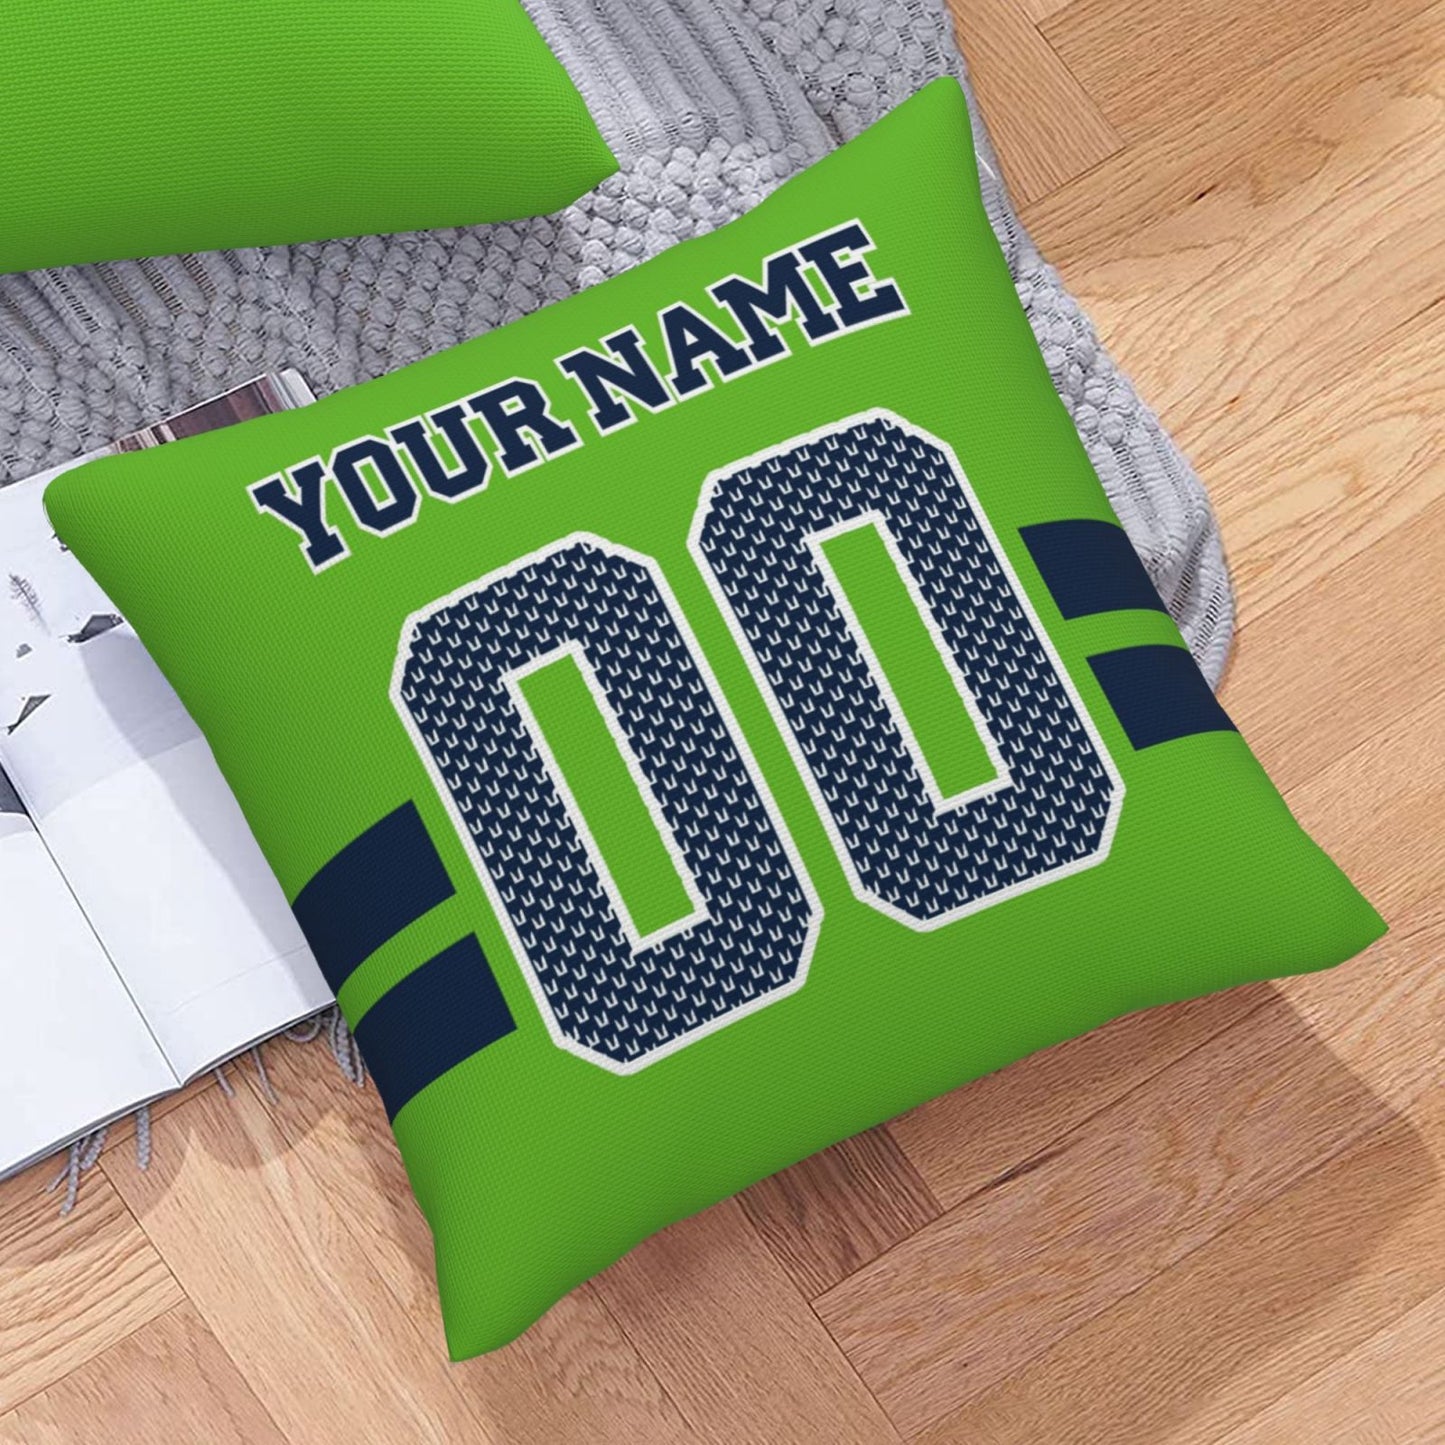 Custom Green Seattle Seahawks Decorative Throw Pillow Case - Print Personalized Football Team Fans Name & Number Birthday Gift